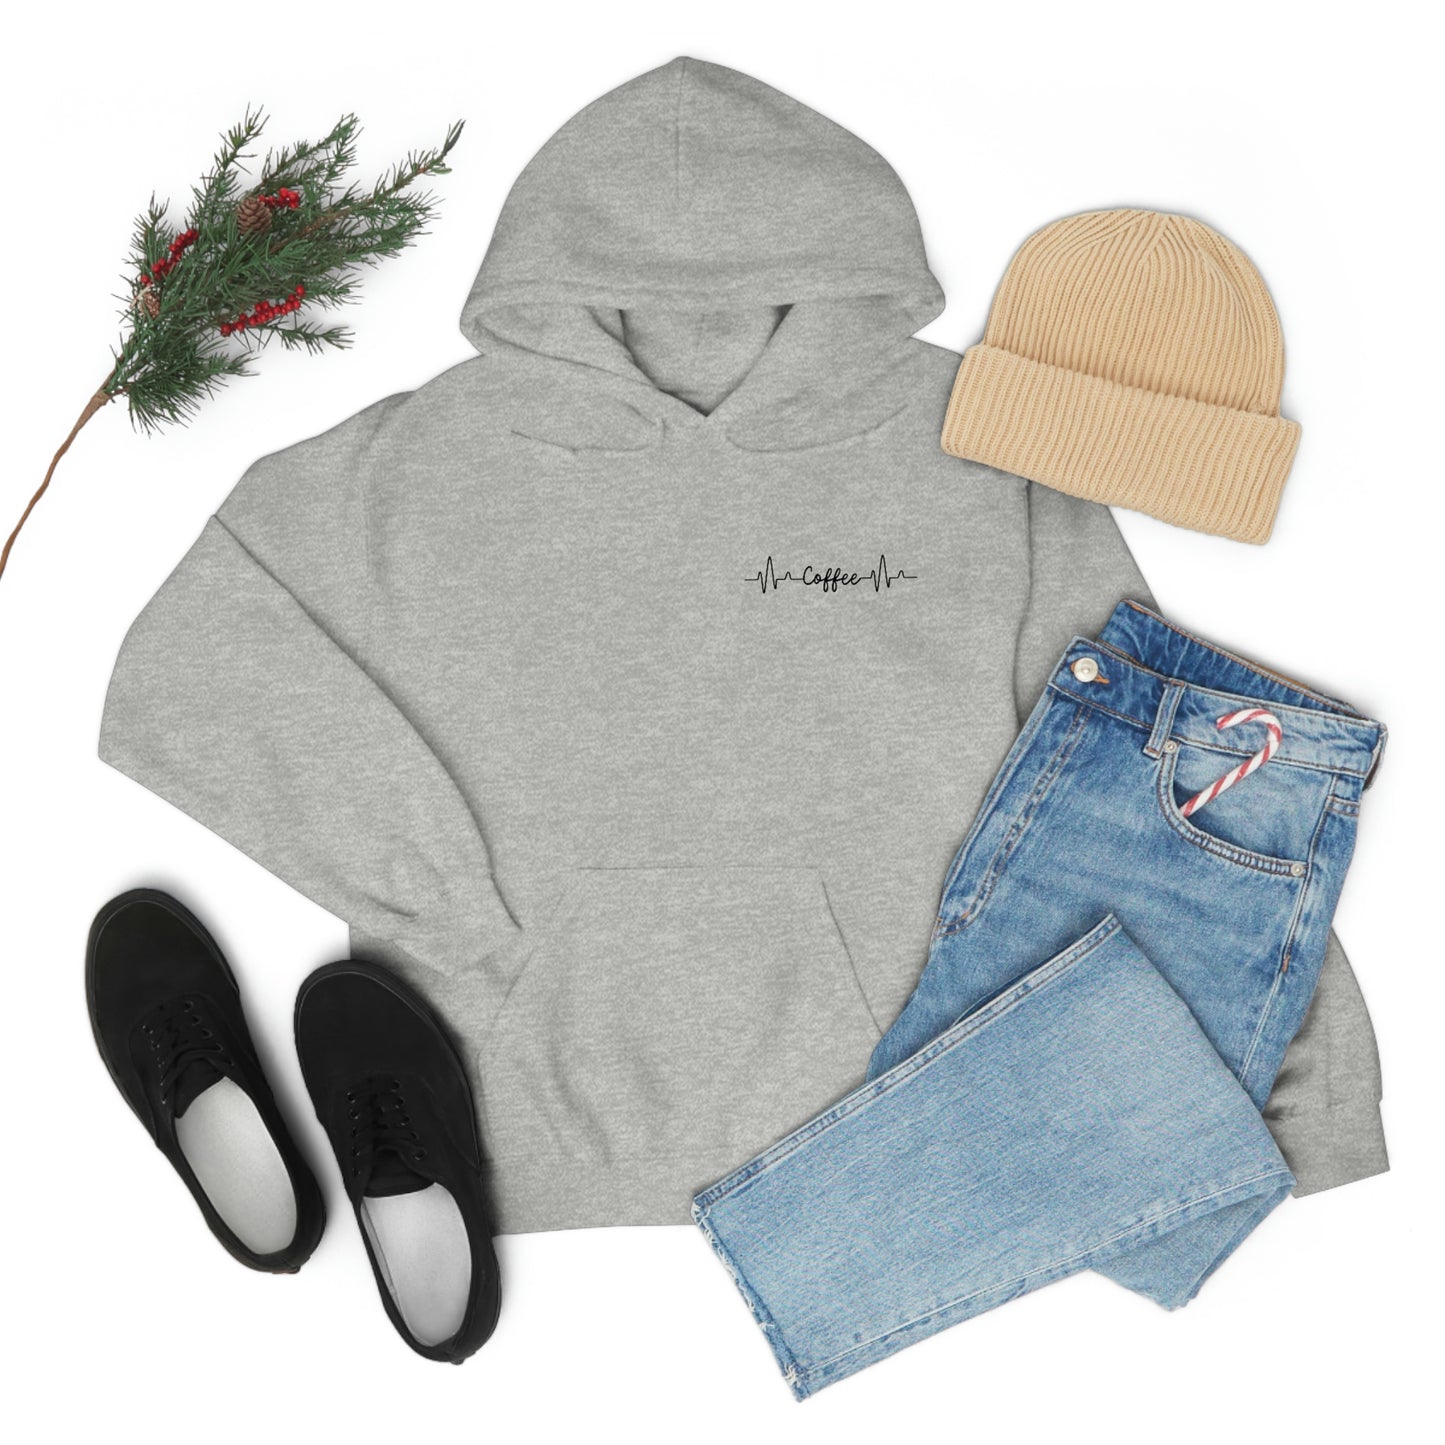 Hoodie Treat Yourself to Cozy Comfort and Caffeine with Our Lifeline Coffee Hooded Sweatshirt - Perfect for Any Coffee Lover!